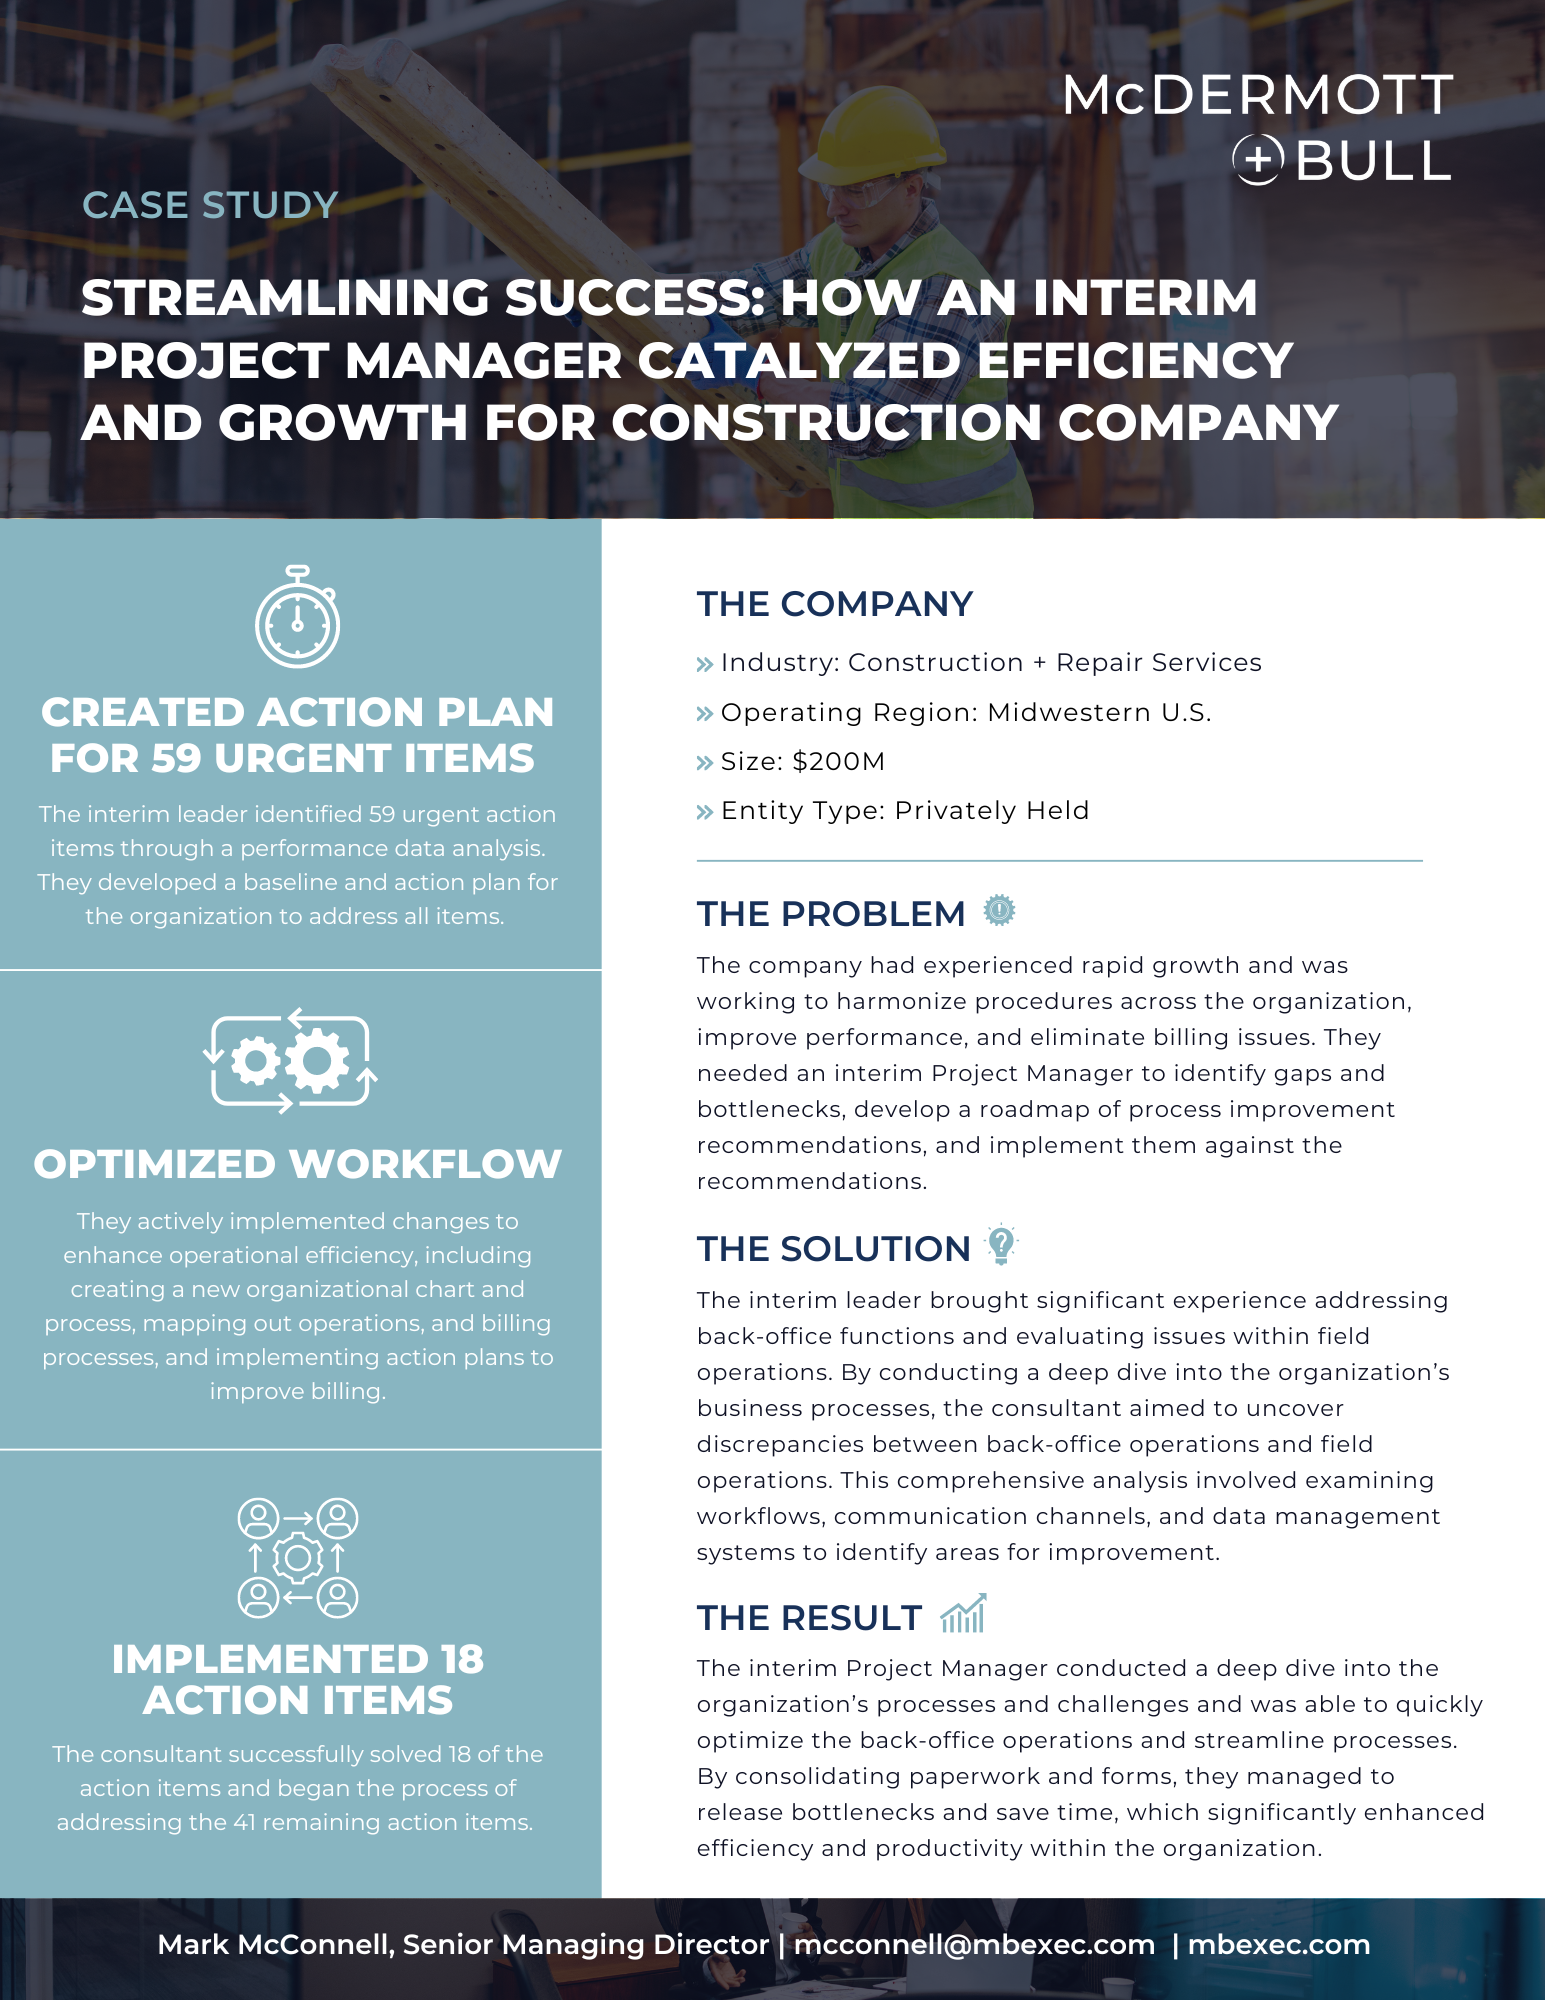 Streamlining Success: How an Interim Project Manager Catalyzed Efficiency and Growth for Construction Company